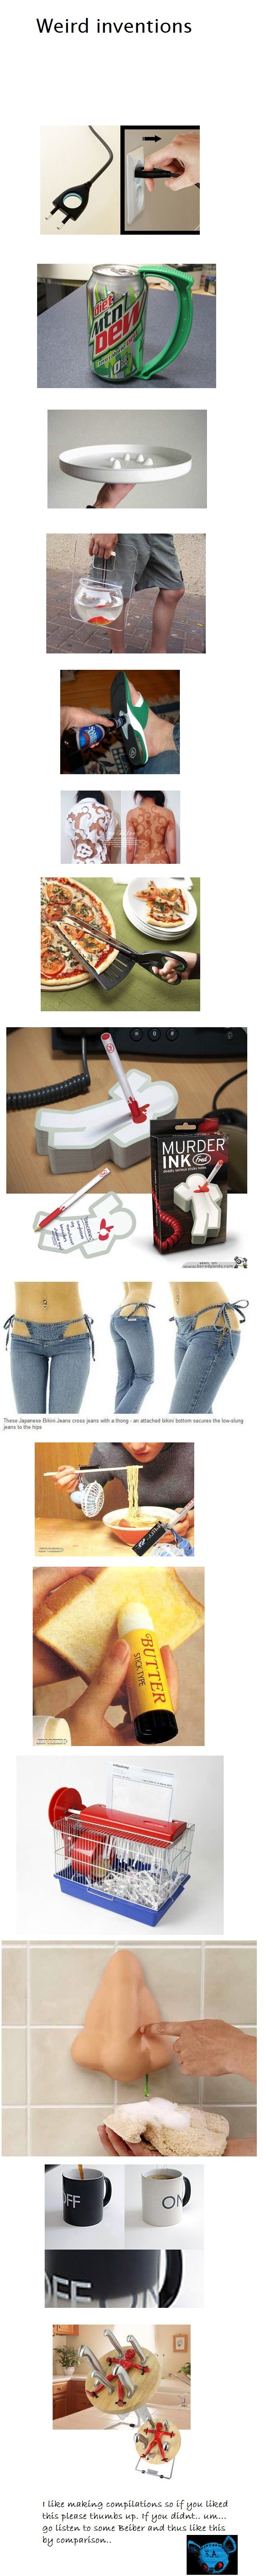 Weird inventions. DO NOT read the tags...&lt;br /&gt; &lt;a href=&quot;pictures/1512276/My+New+Dream+Pet/&quot; target=blank&gt;funnyjunk.com/funny_pictures/151